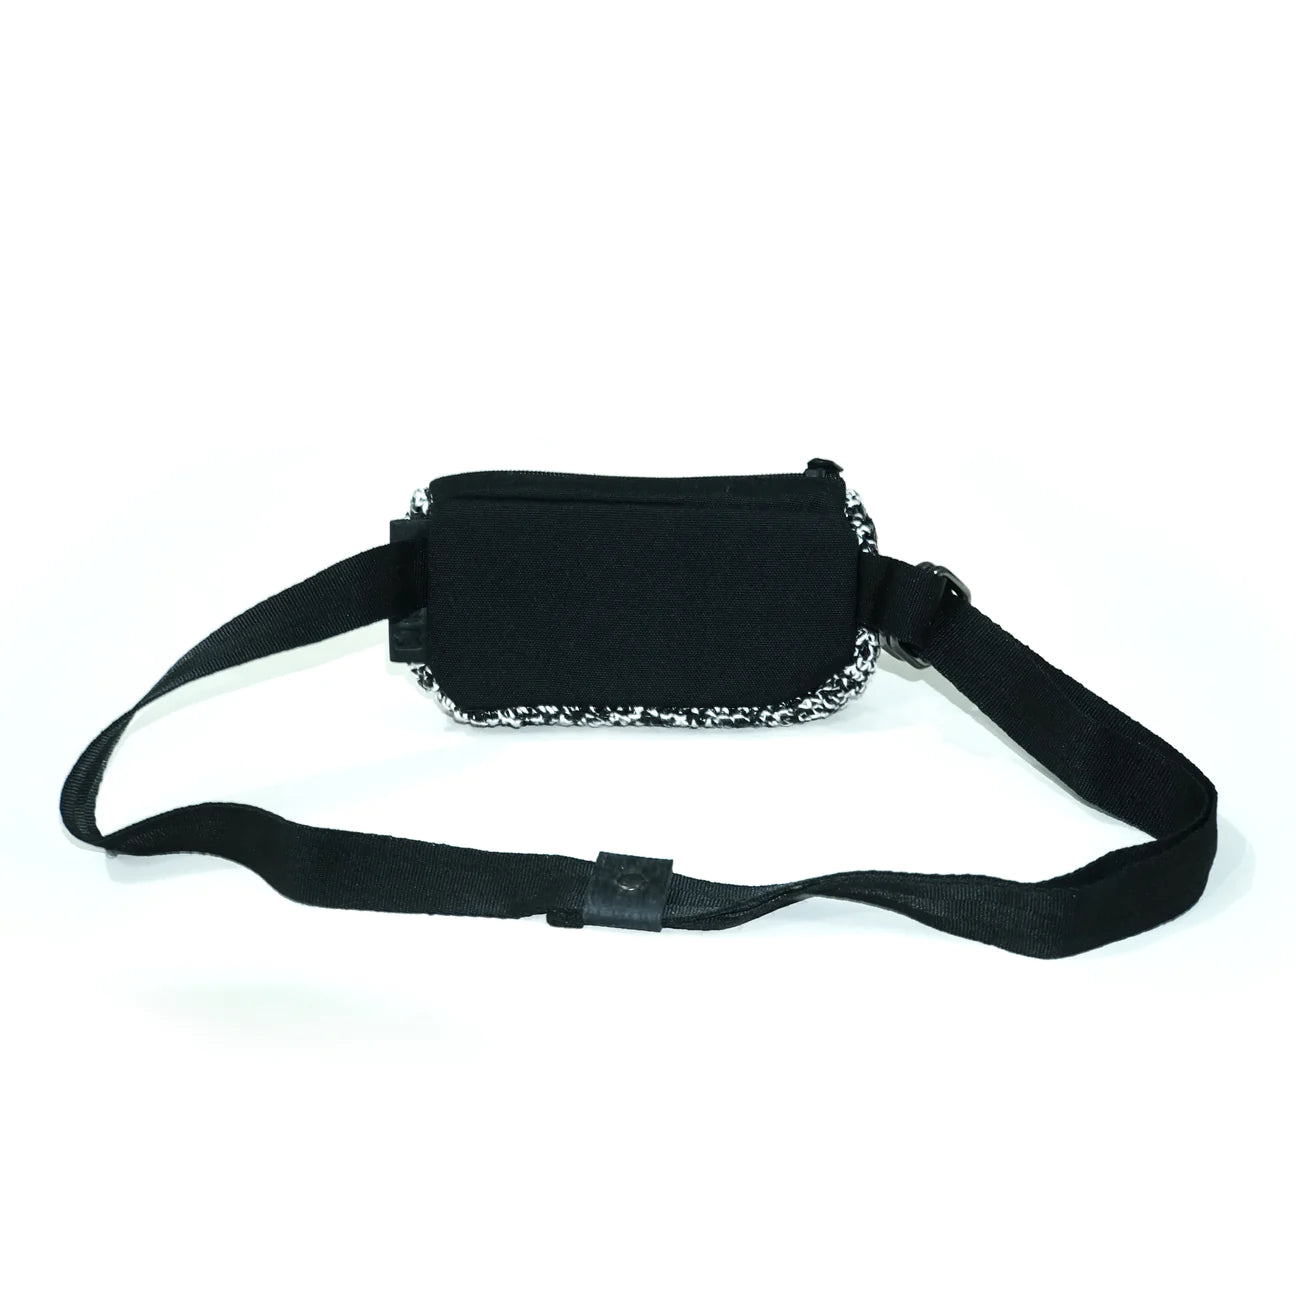 Recycled Fanny pack